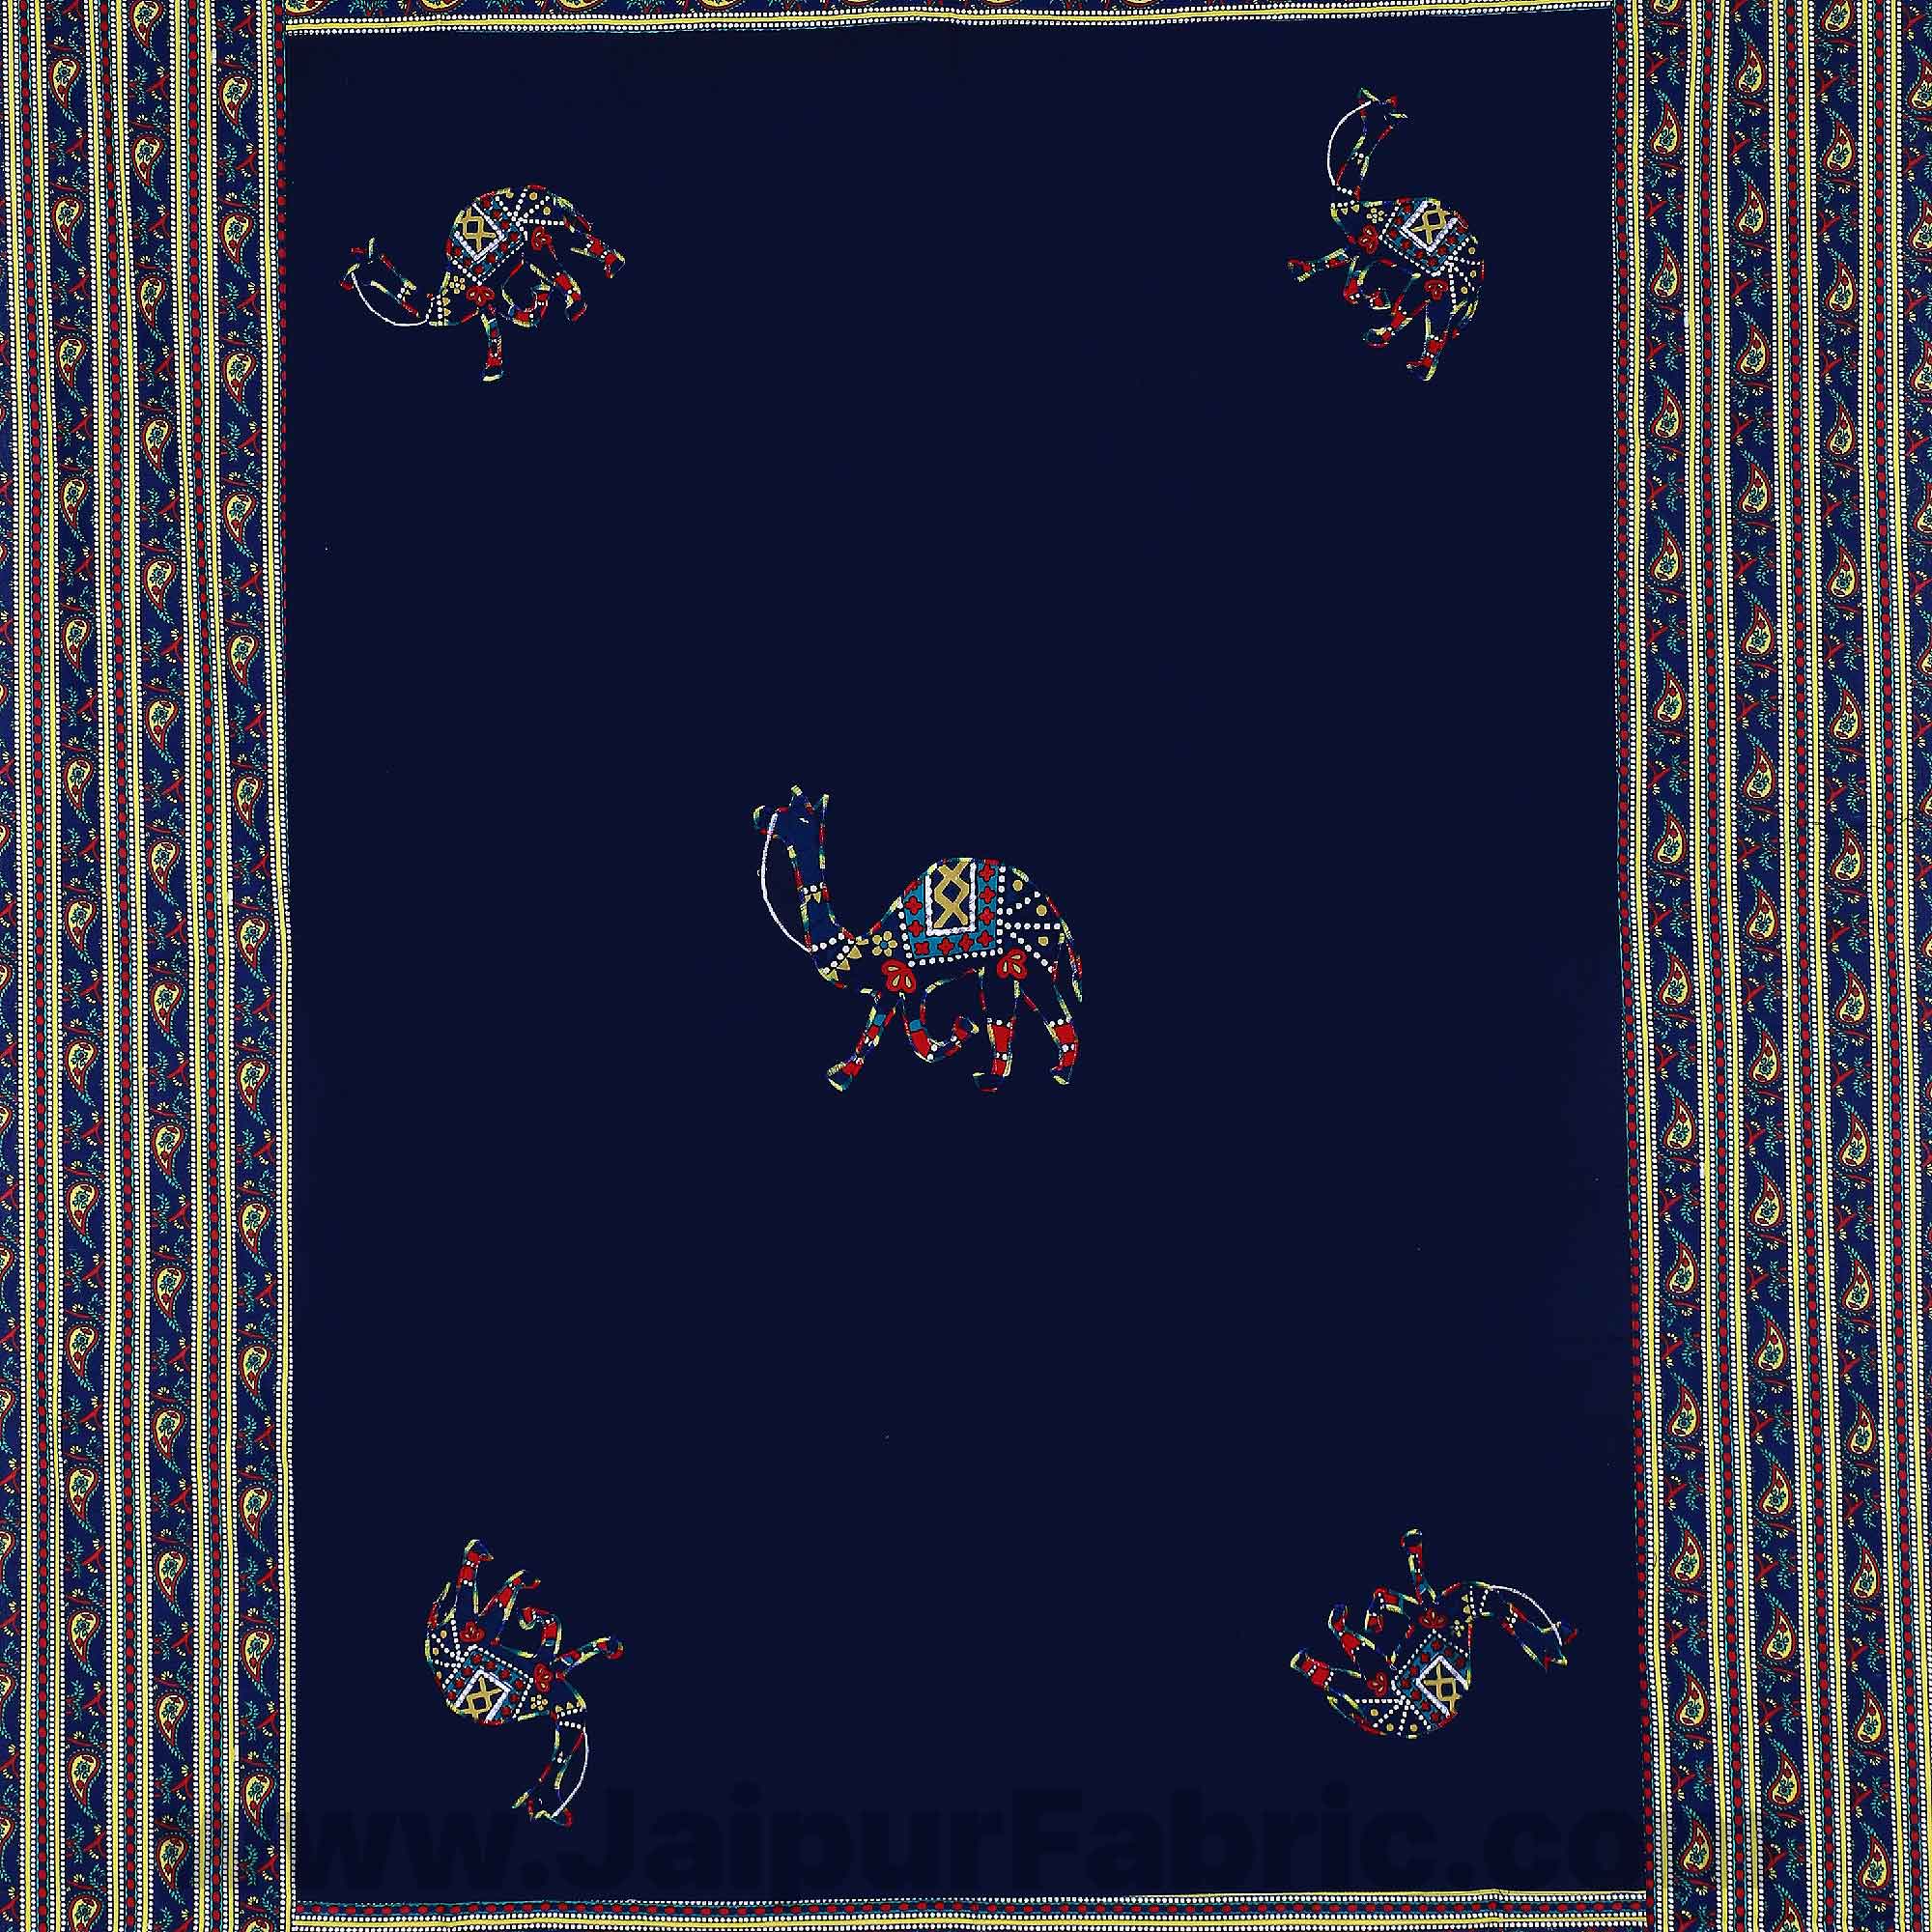 Applique Blue Camel Jaipuri  Hand Made Embroidery Patch Work Single Bedsheet